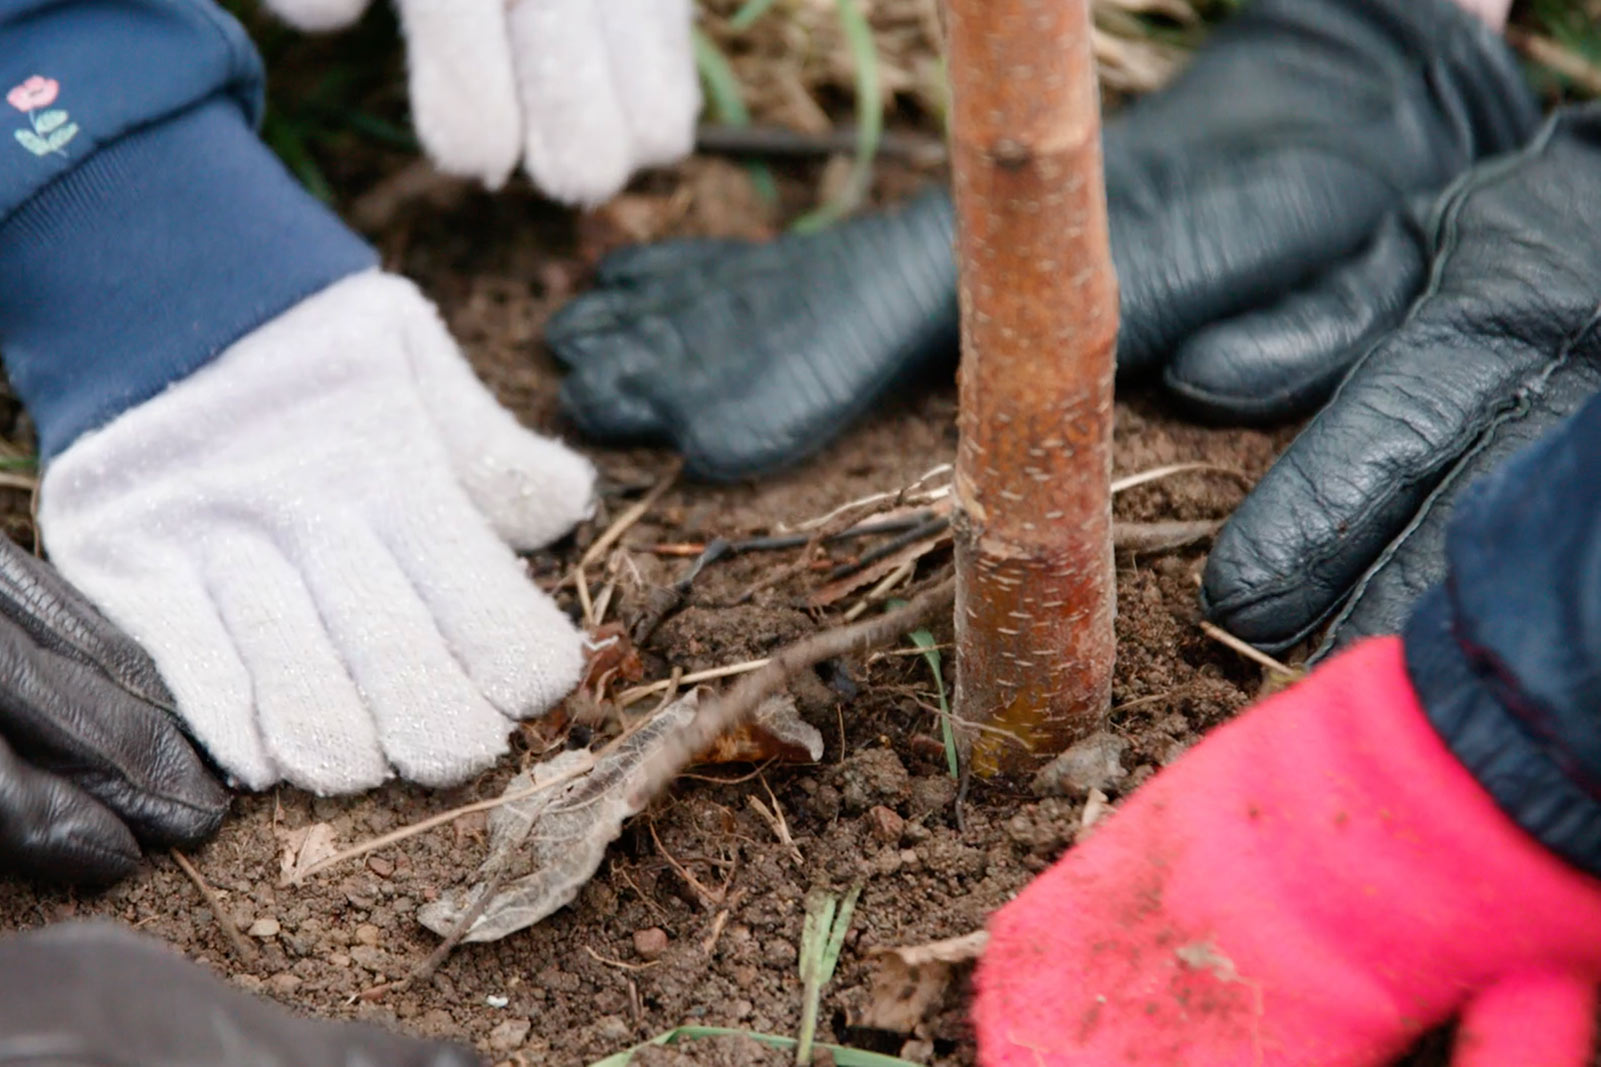 A close-up of hands pressing down on the soil, planting a tree.